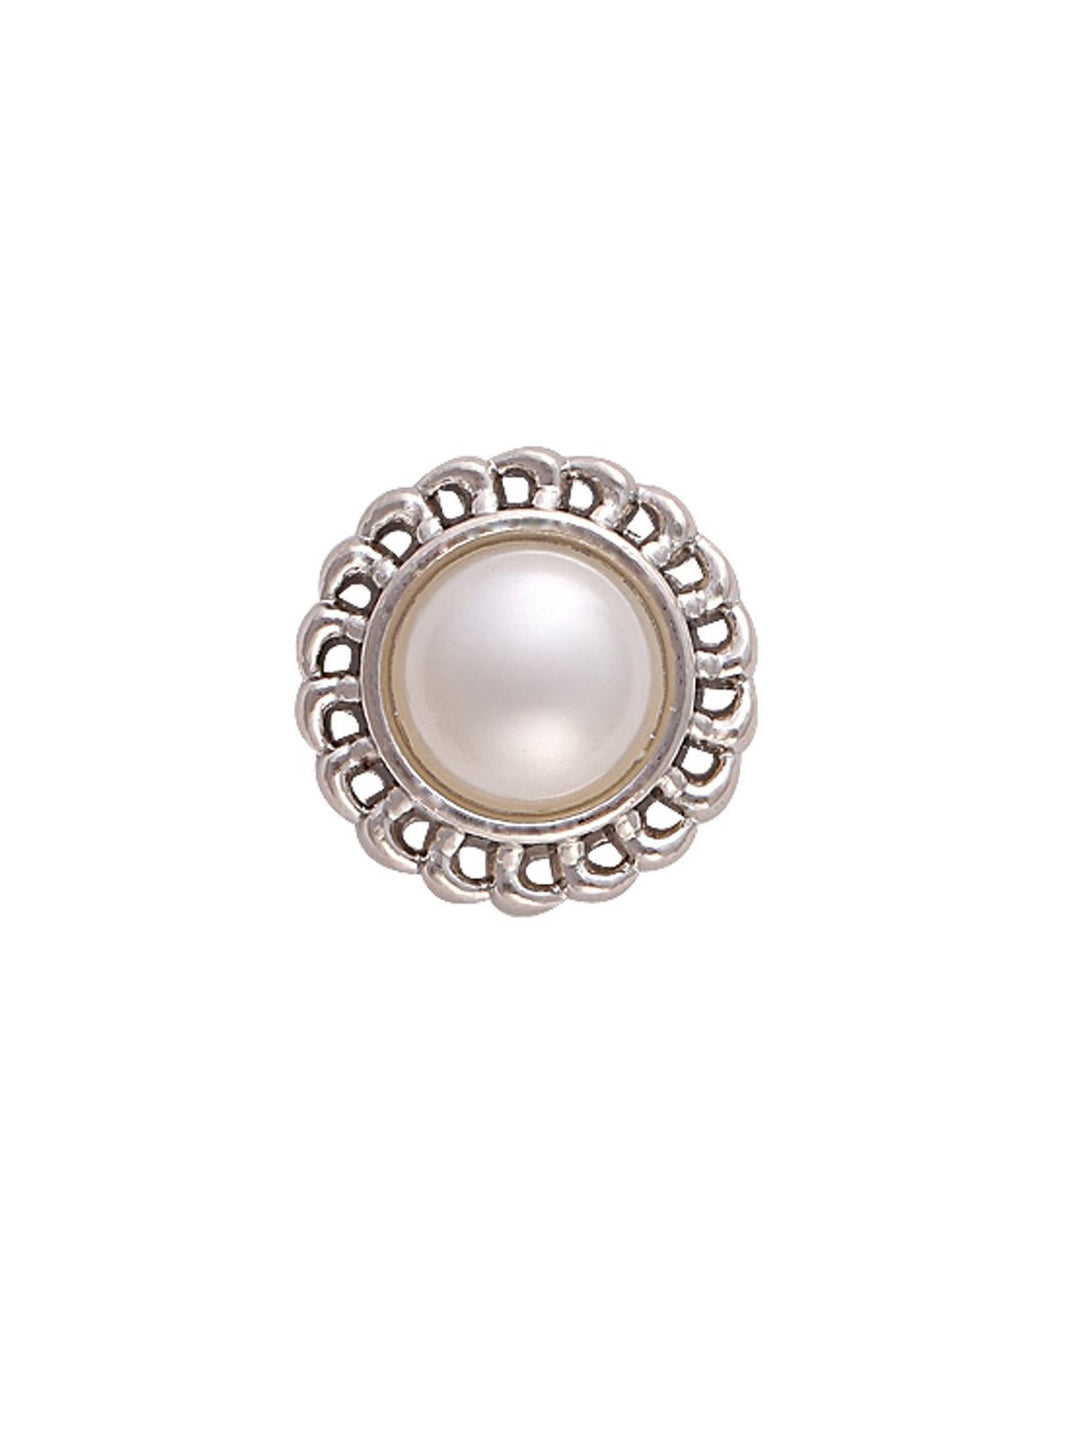 Flower Design Round Shape Shiny Silver Pearl Metal Button